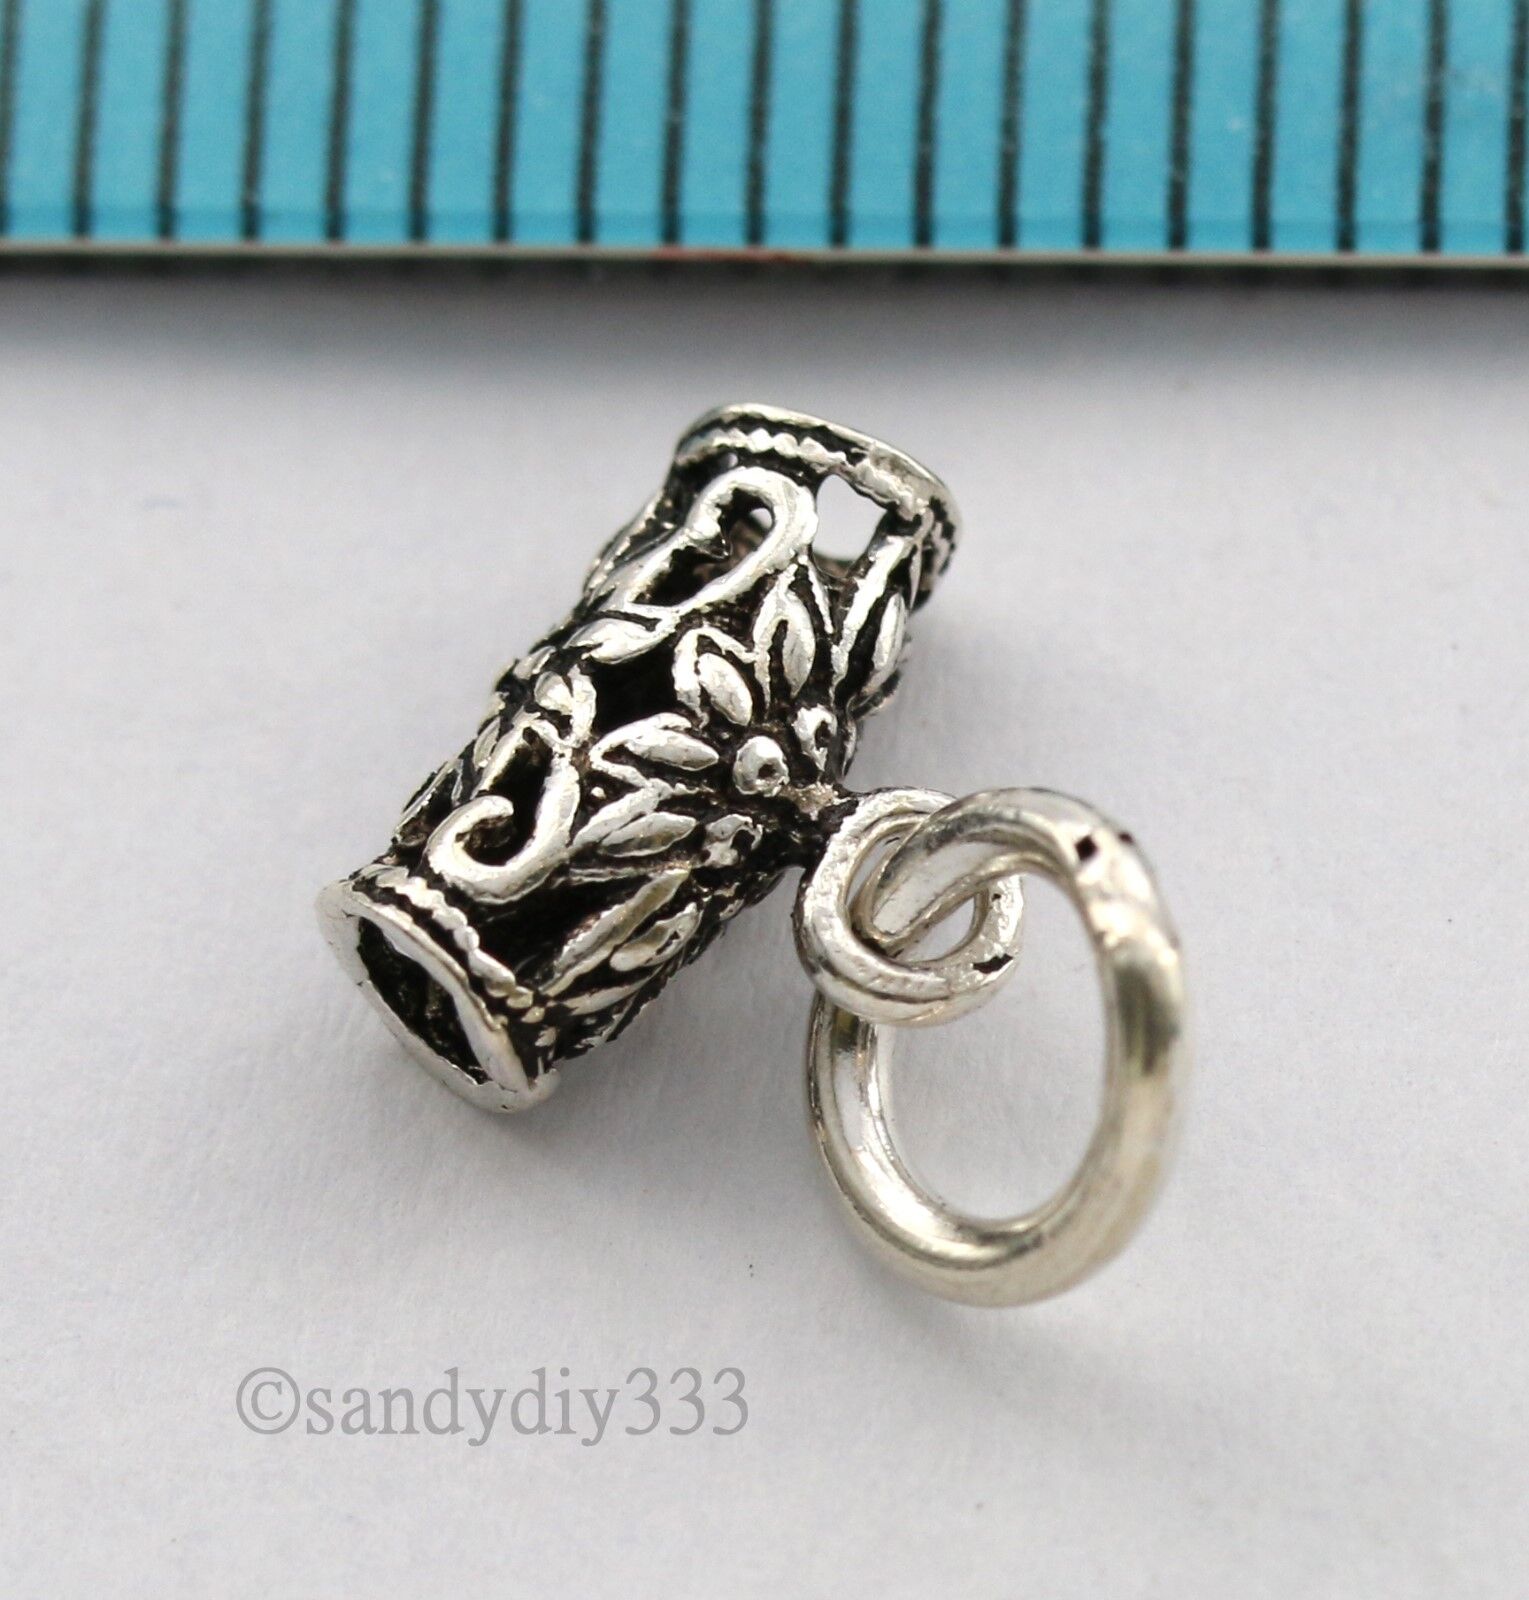 1x OXIDIZED STERLING SILVER FLOWER PENDANT SLIDE BAIL CONNECTOR 8.8mm  #2741